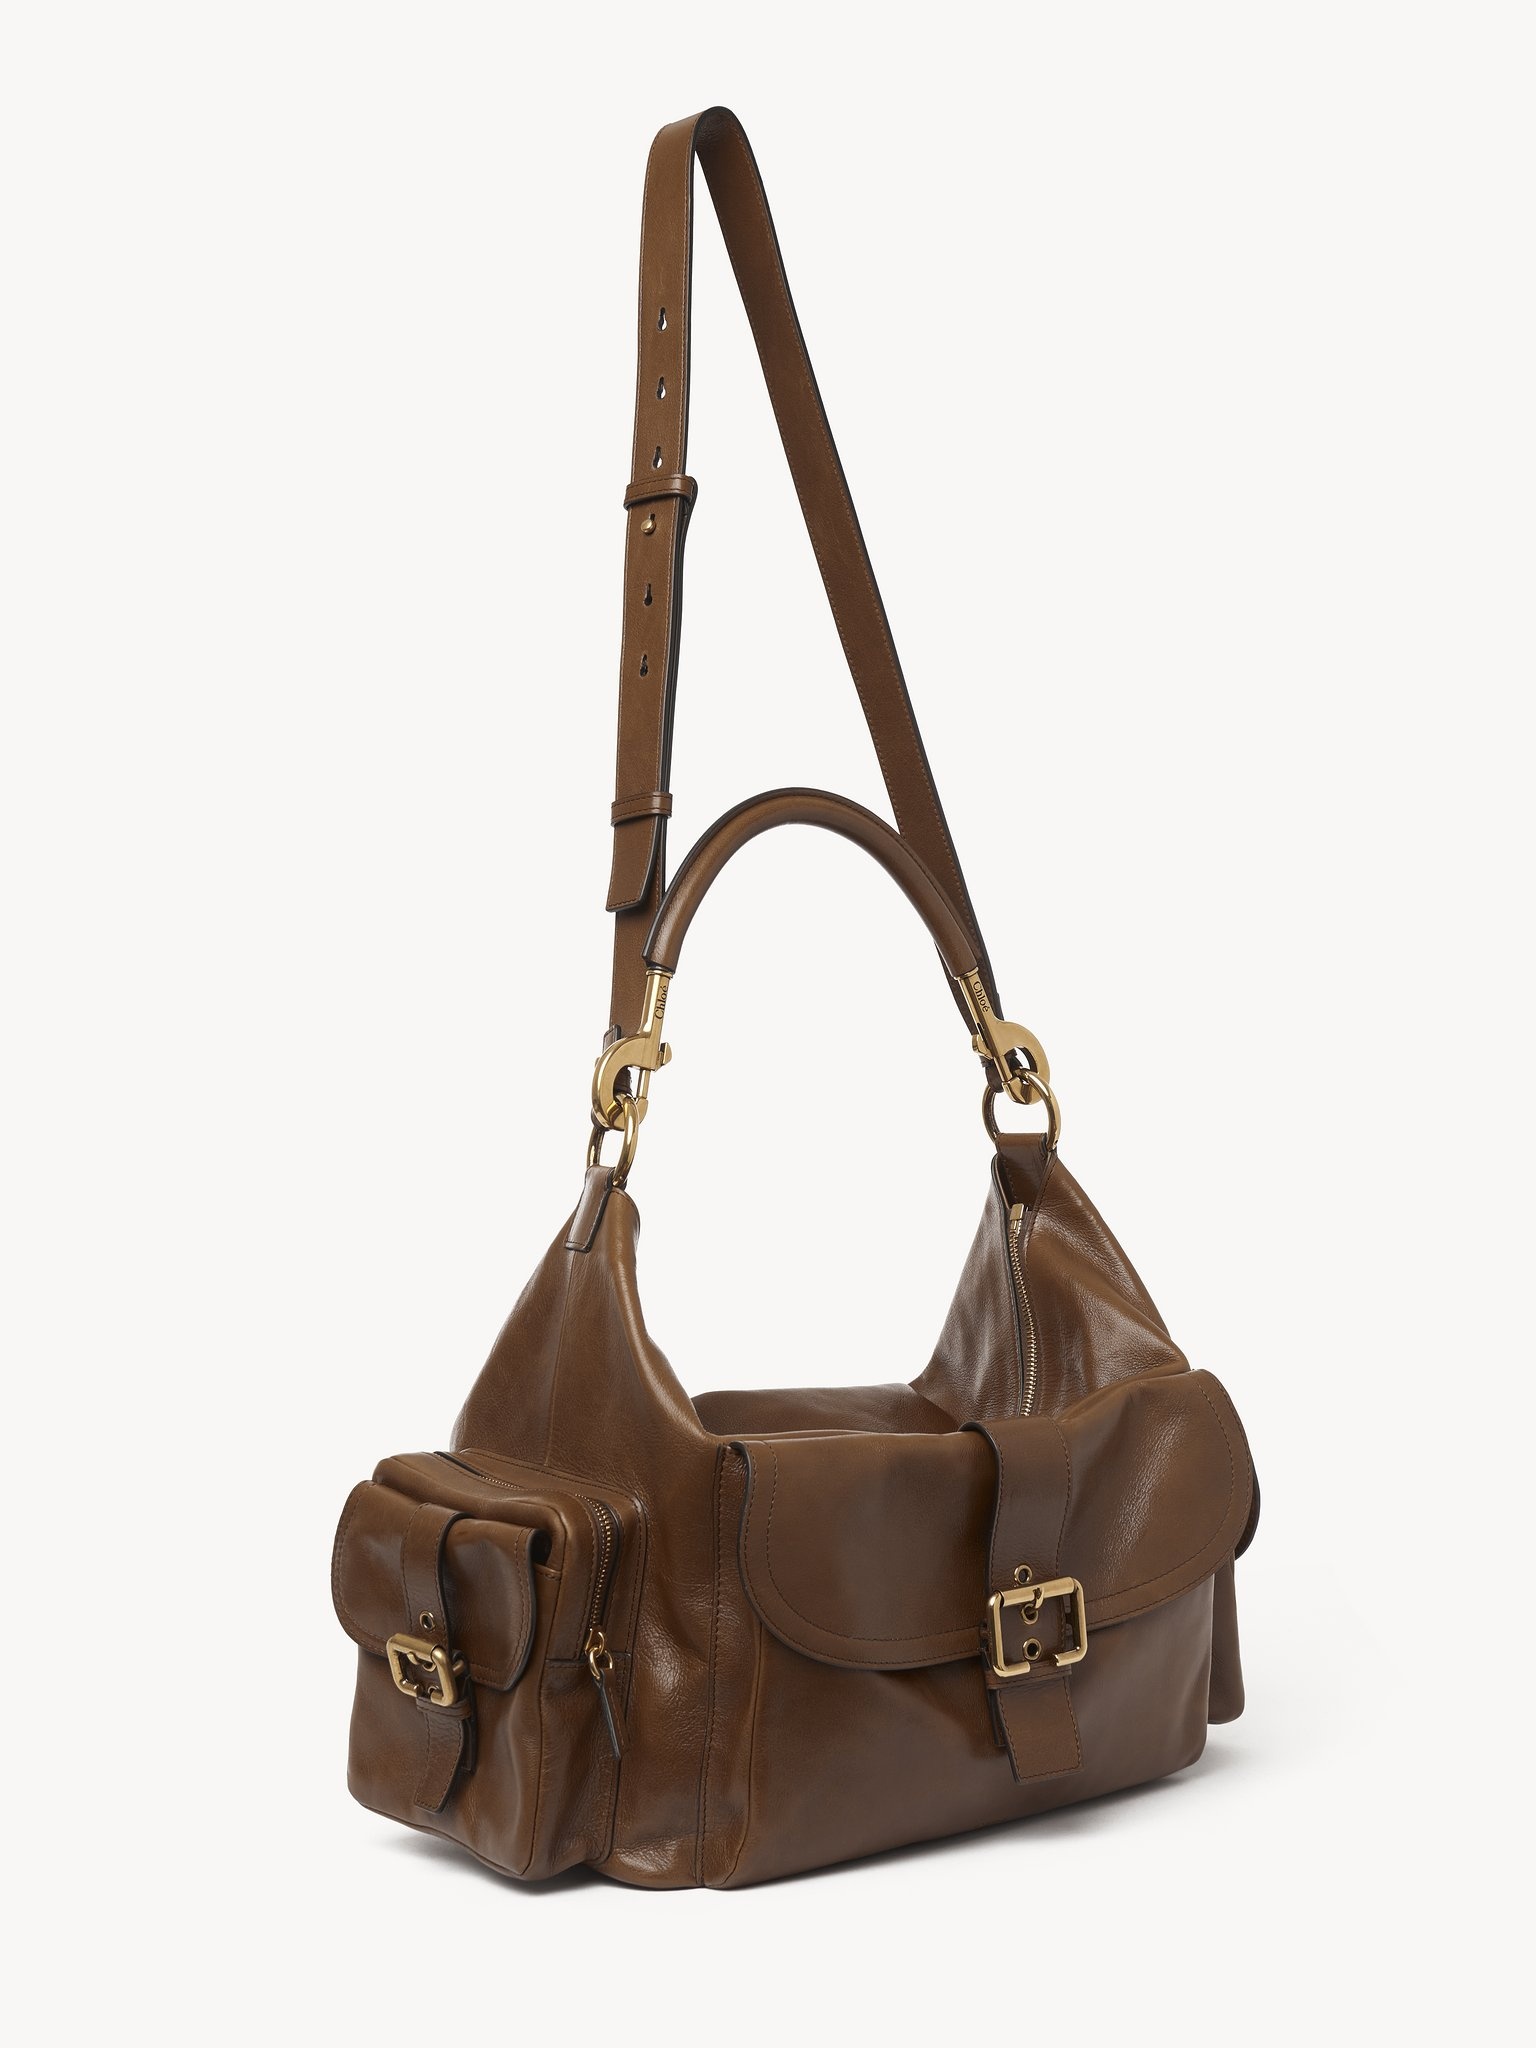 LARGE CAMERA BAG IN SOFT LEATHER - 2